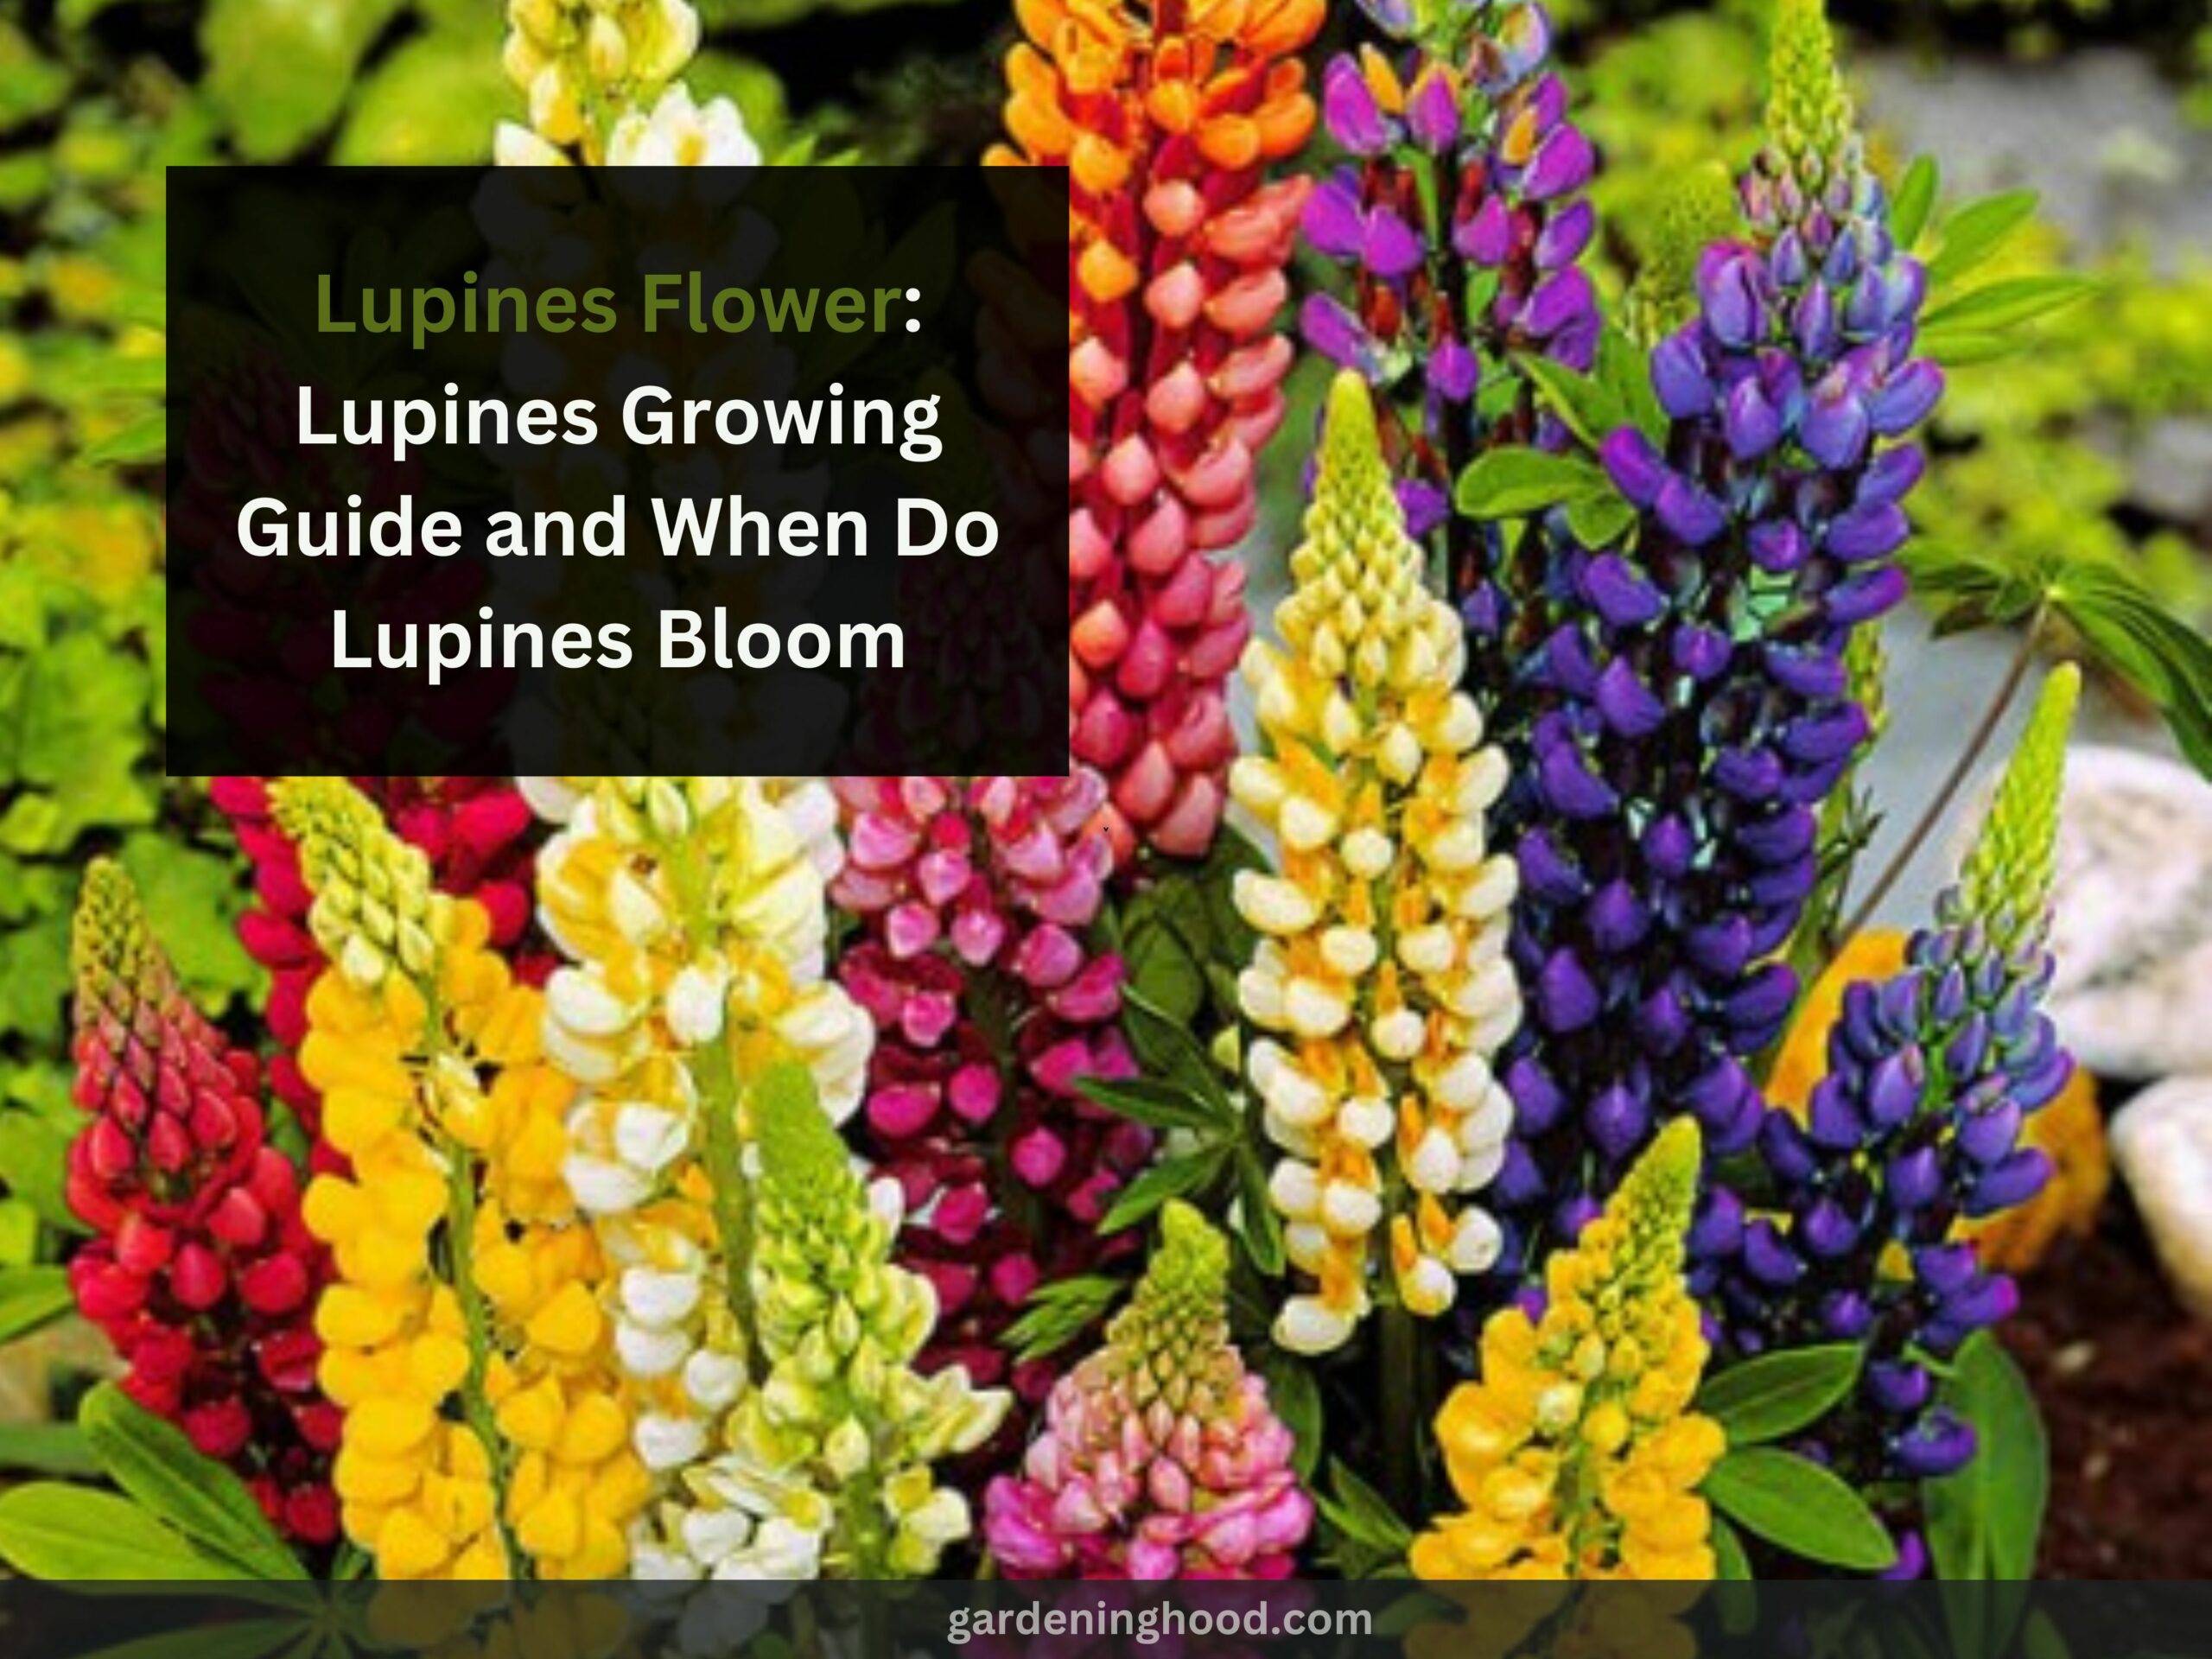 Lupines Flower: Lupines Growing Guide and When Do Lupines Bloom